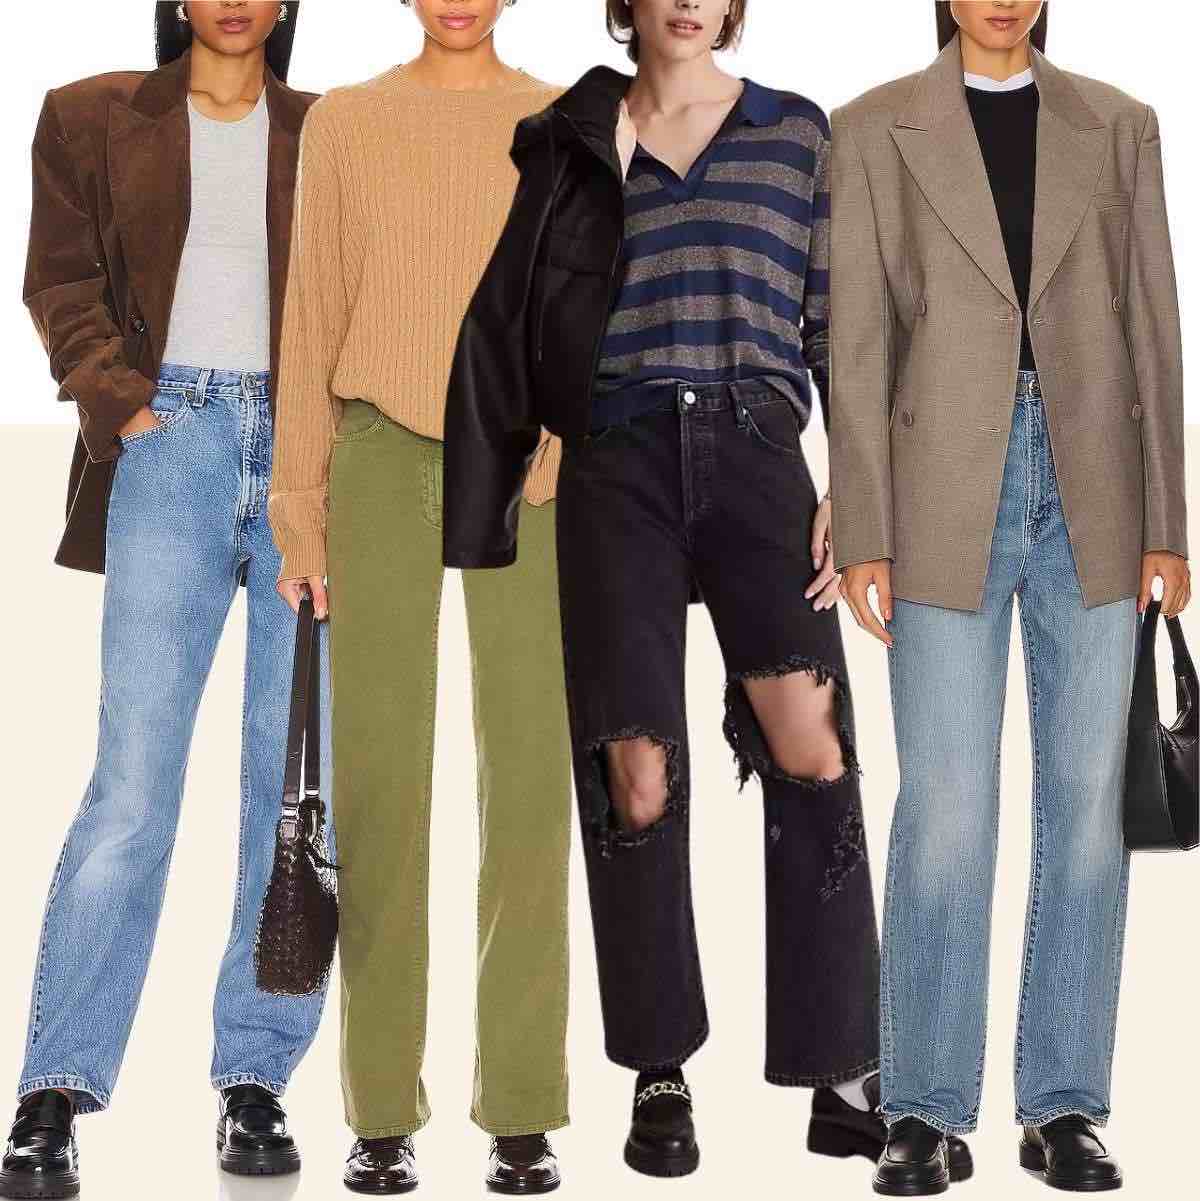 Collage of 4 women wearing different wide leg jeans with loafers.